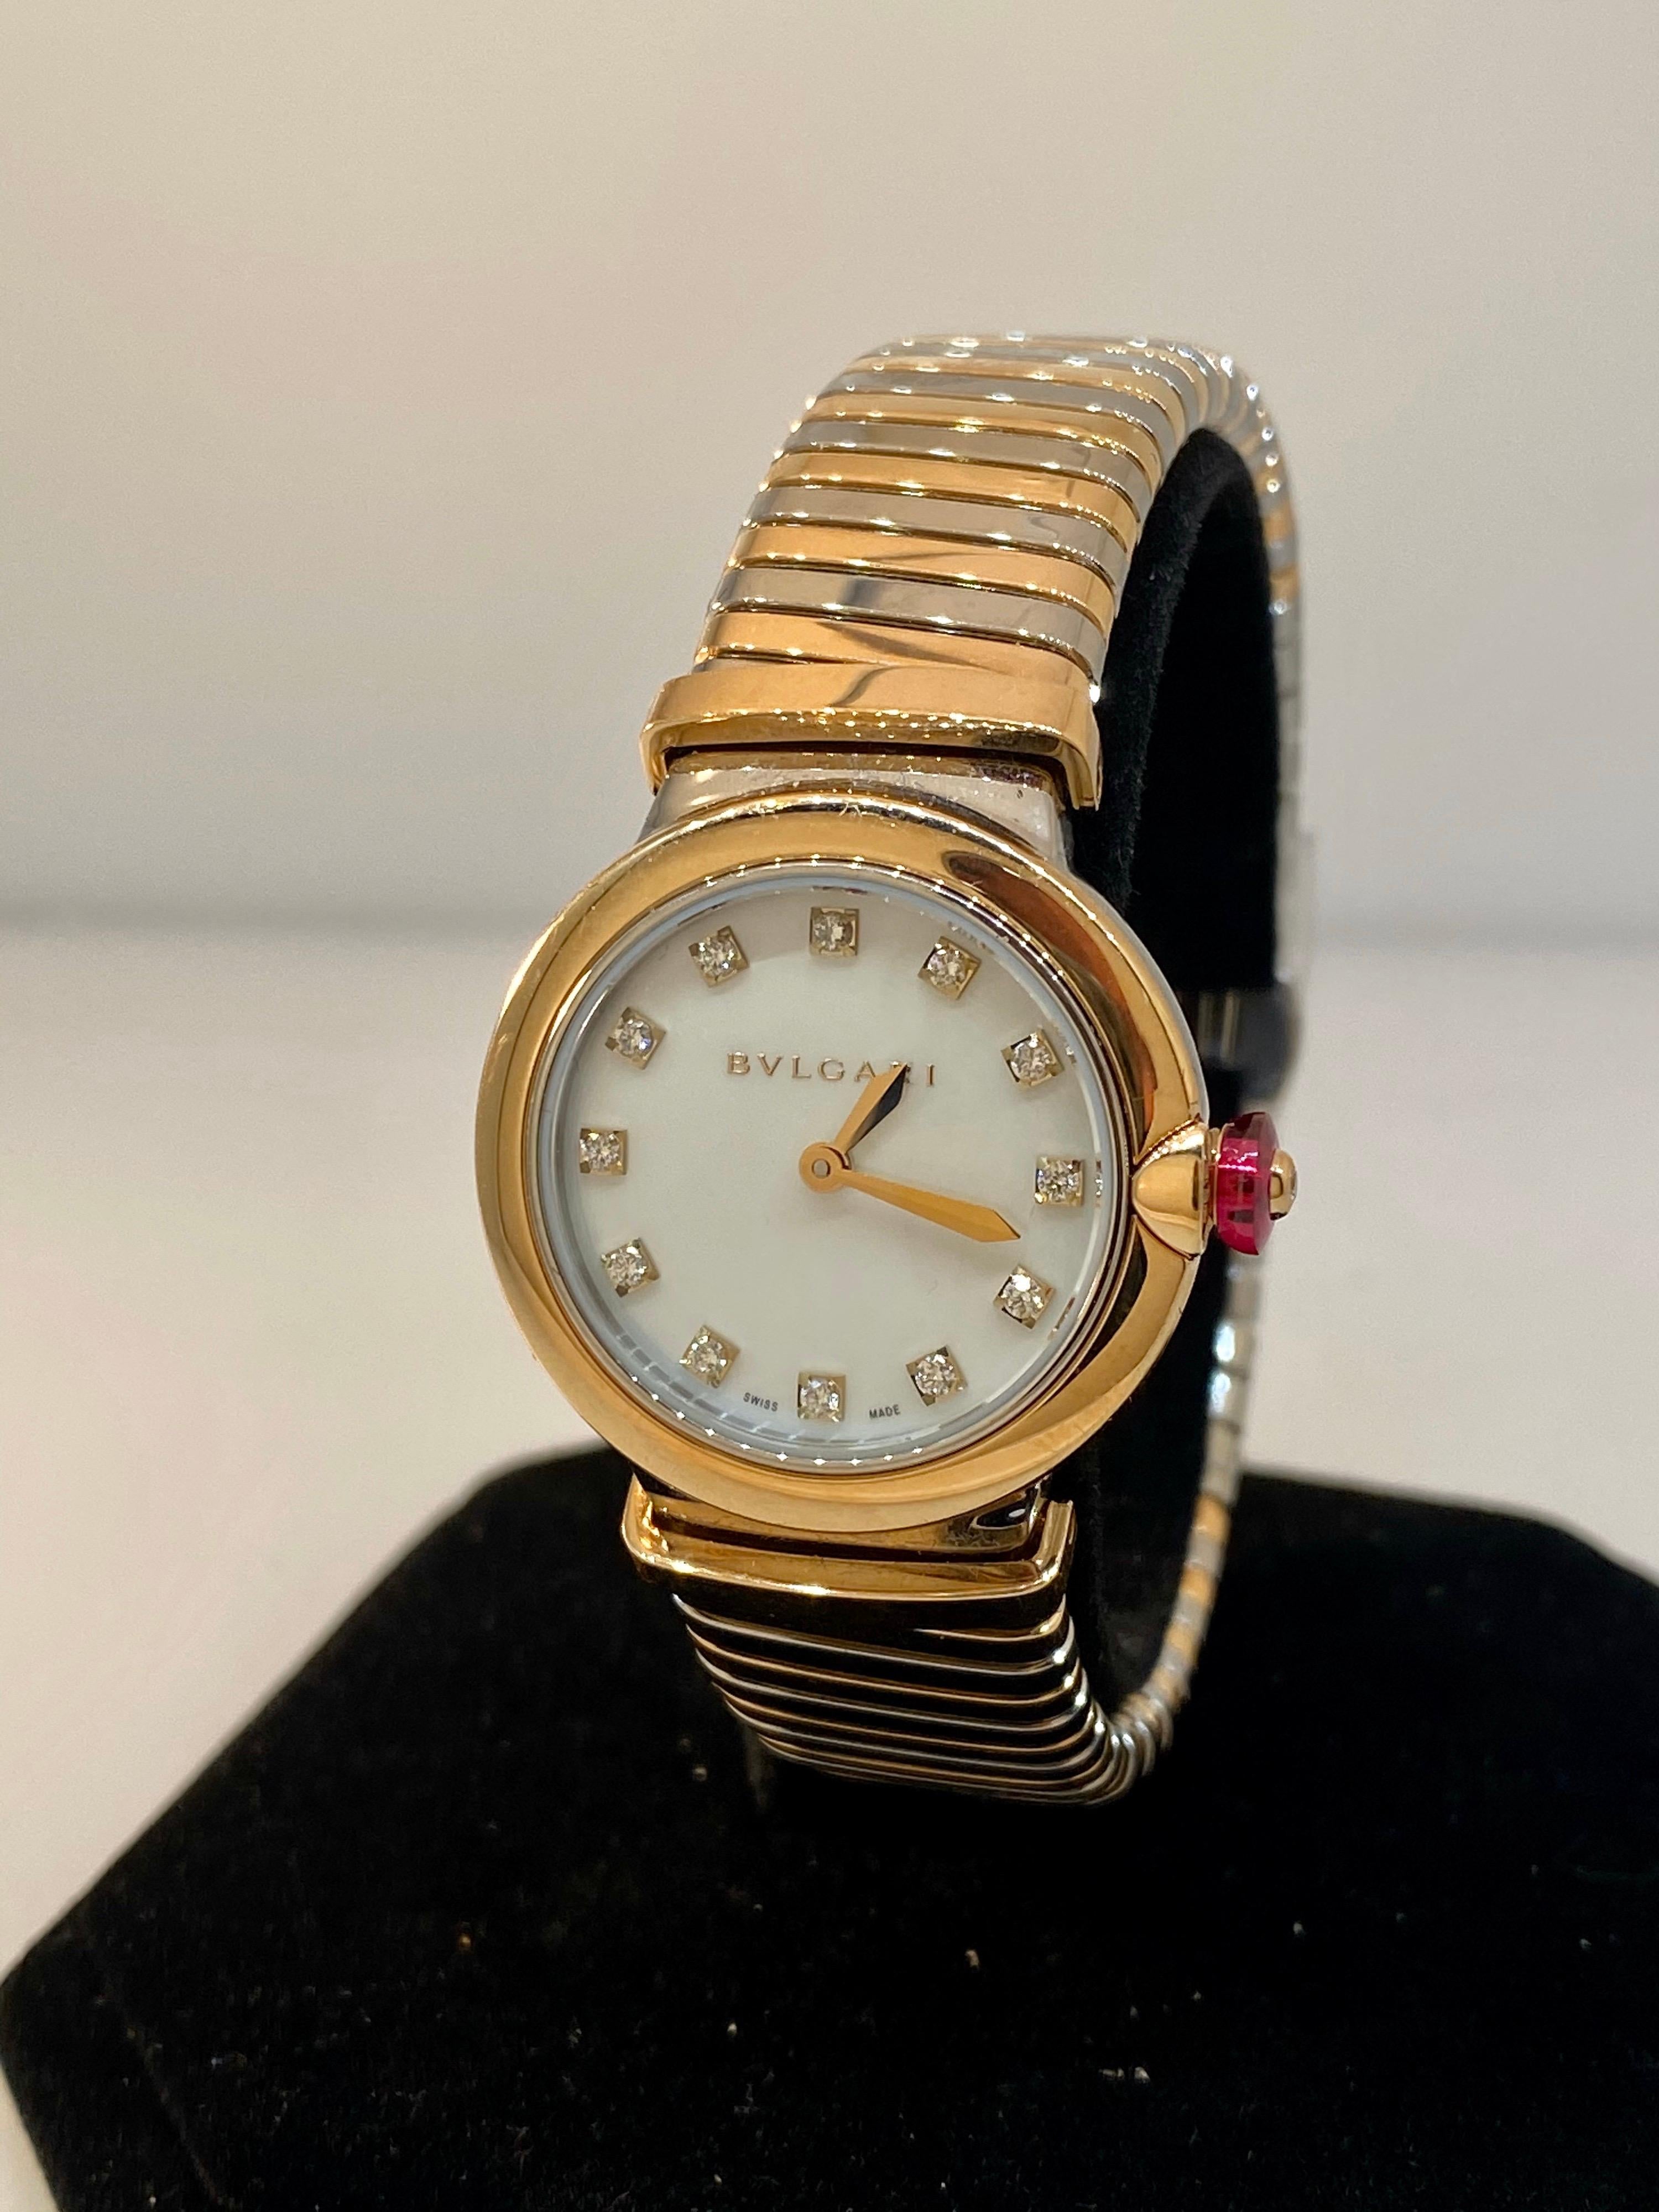 Bulgari Lucea Tubogas Ladies Watch

Model Number: 102952

100% Authentic

Brand New

Comes with original Bulgari box and papers

18 Karat Rose Gold and Stainless Steel Case & Bracelet

White Mother of Pearl Dial  

Diamond Hour Markers

Case